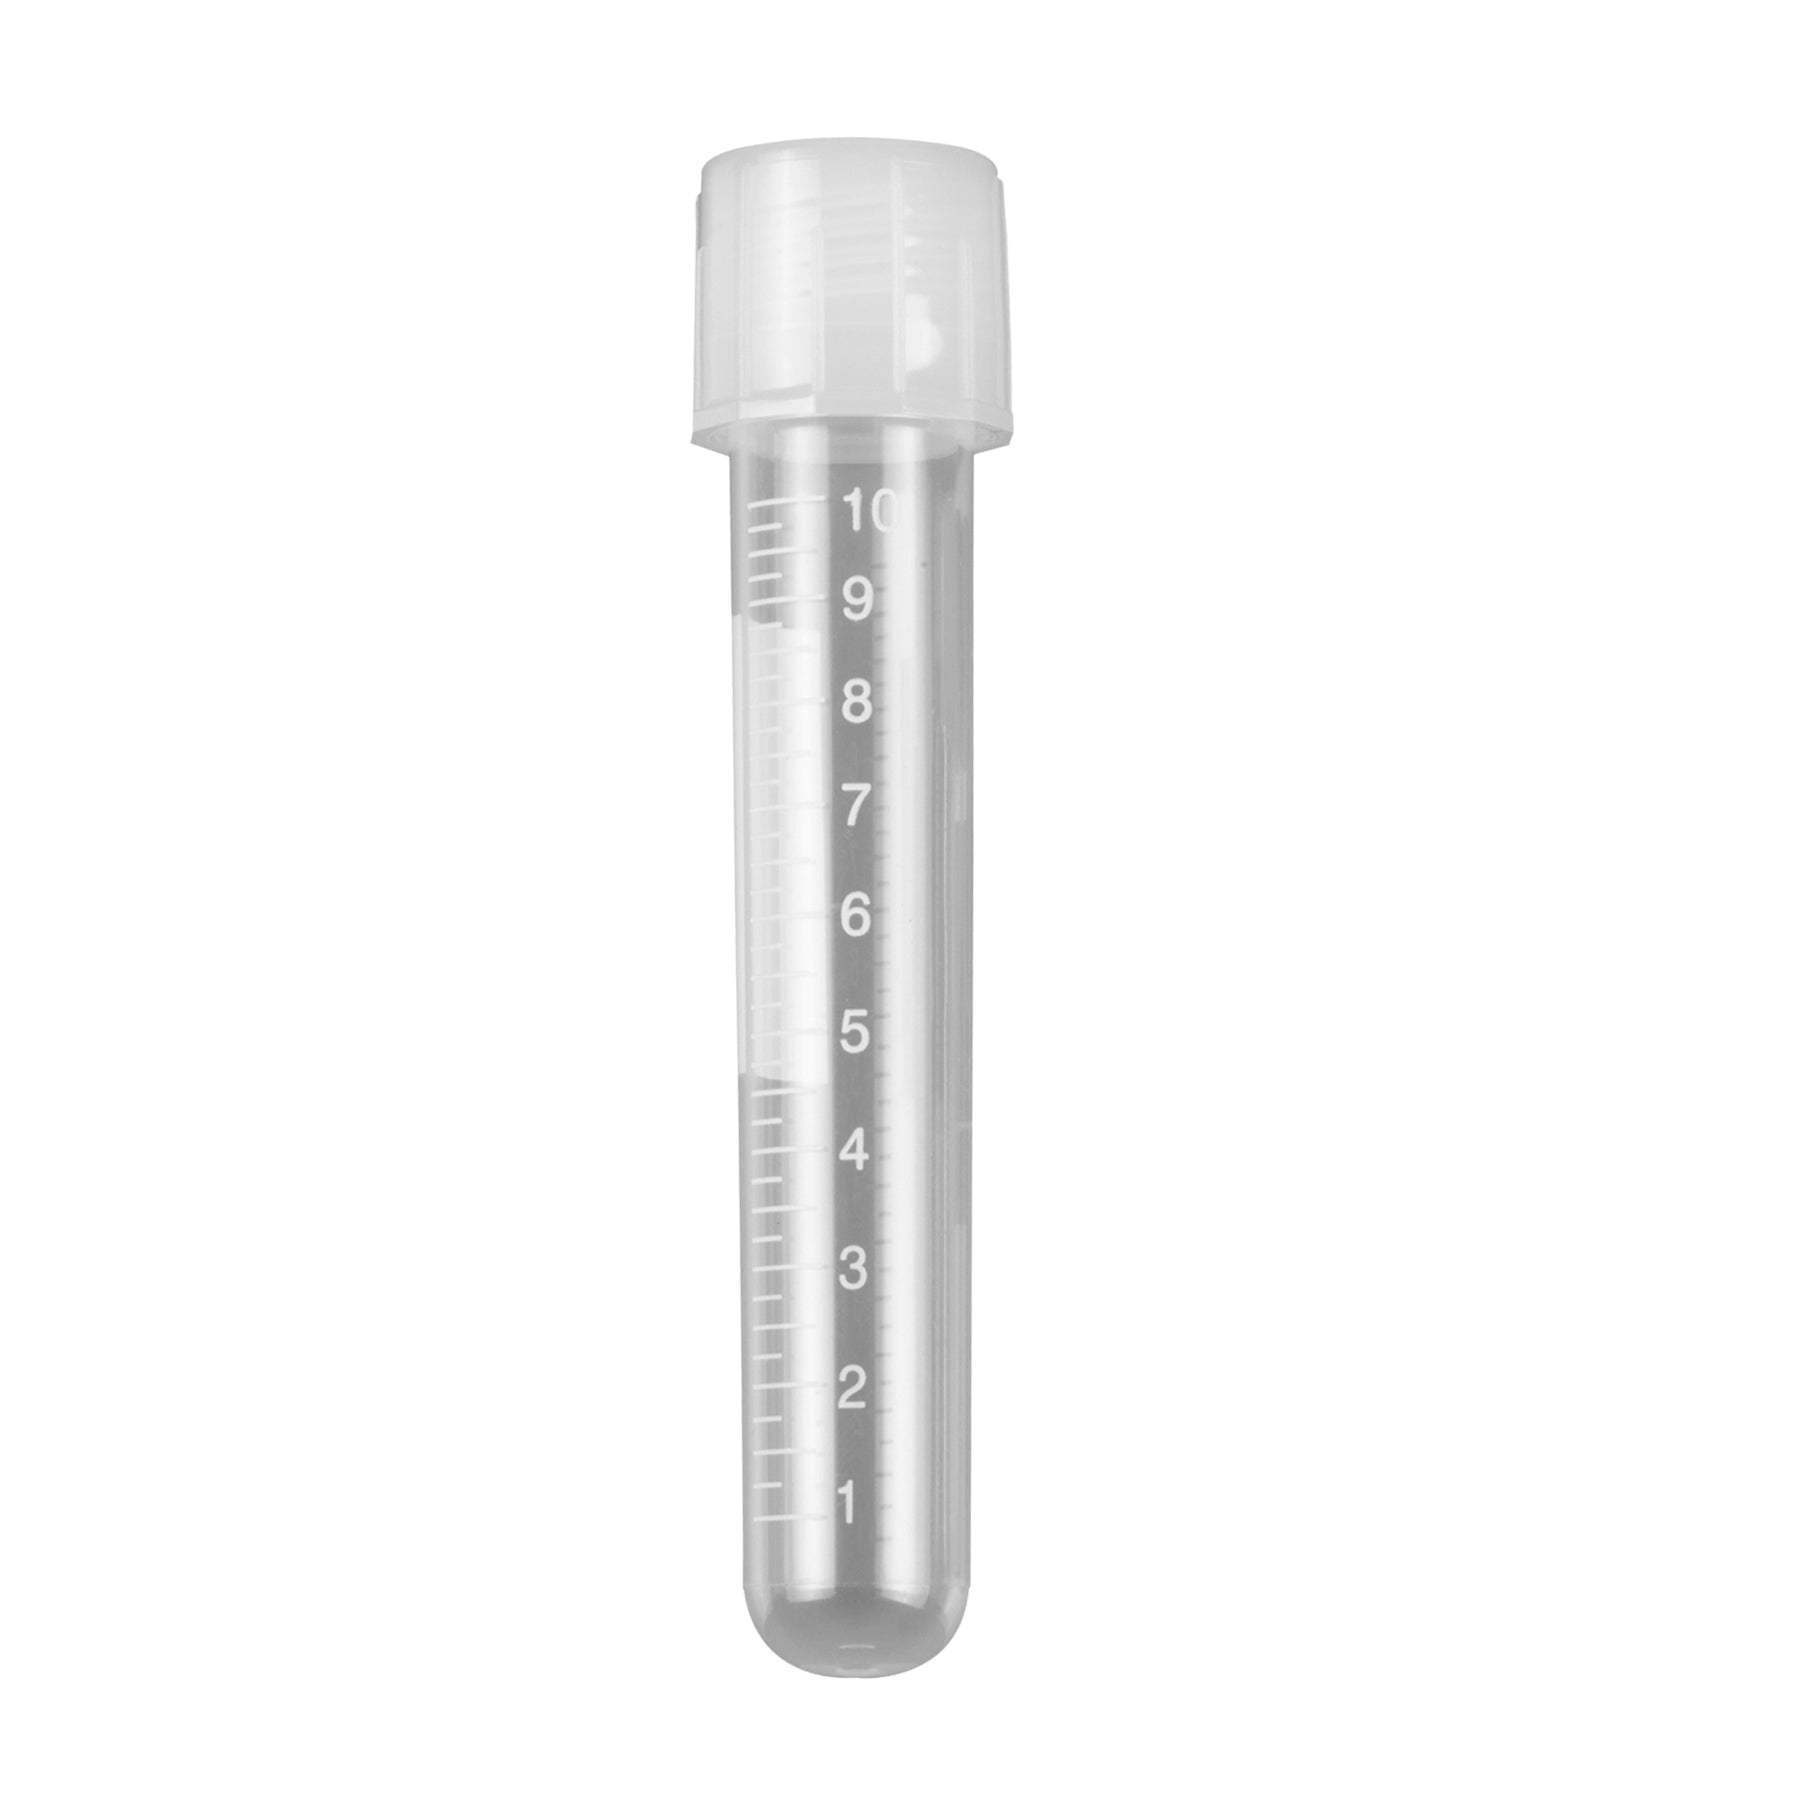 MTC Bio T8850 Culture Tube, 14mL, 17 x 100mm, PP, w/ separate 2-position screw-cap, non-sterile, non-graduated, 1000 tubes and capped bulk packed separately